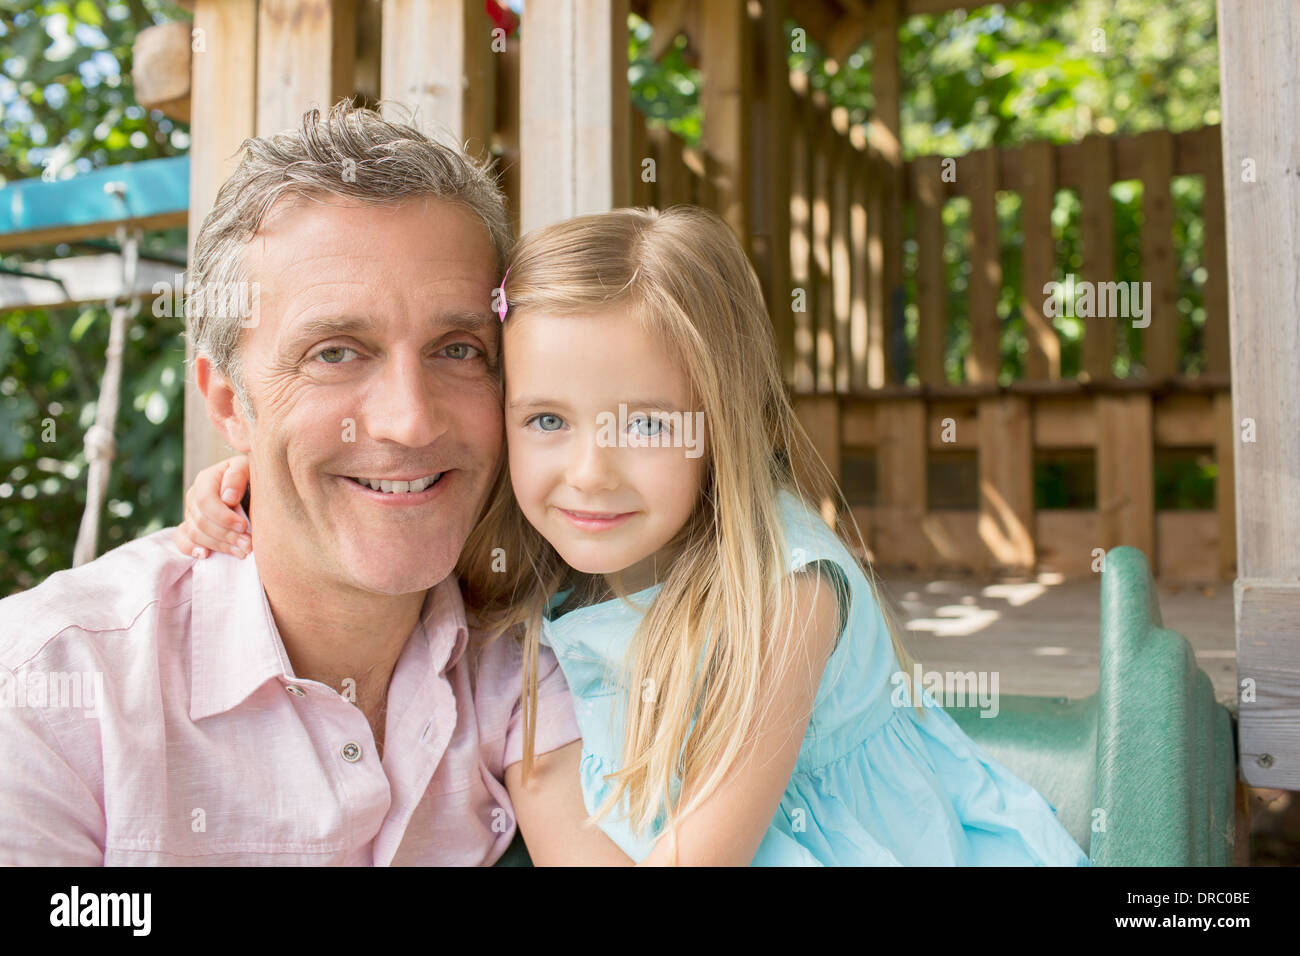 Father and daughter smiling on playset Stock Photo